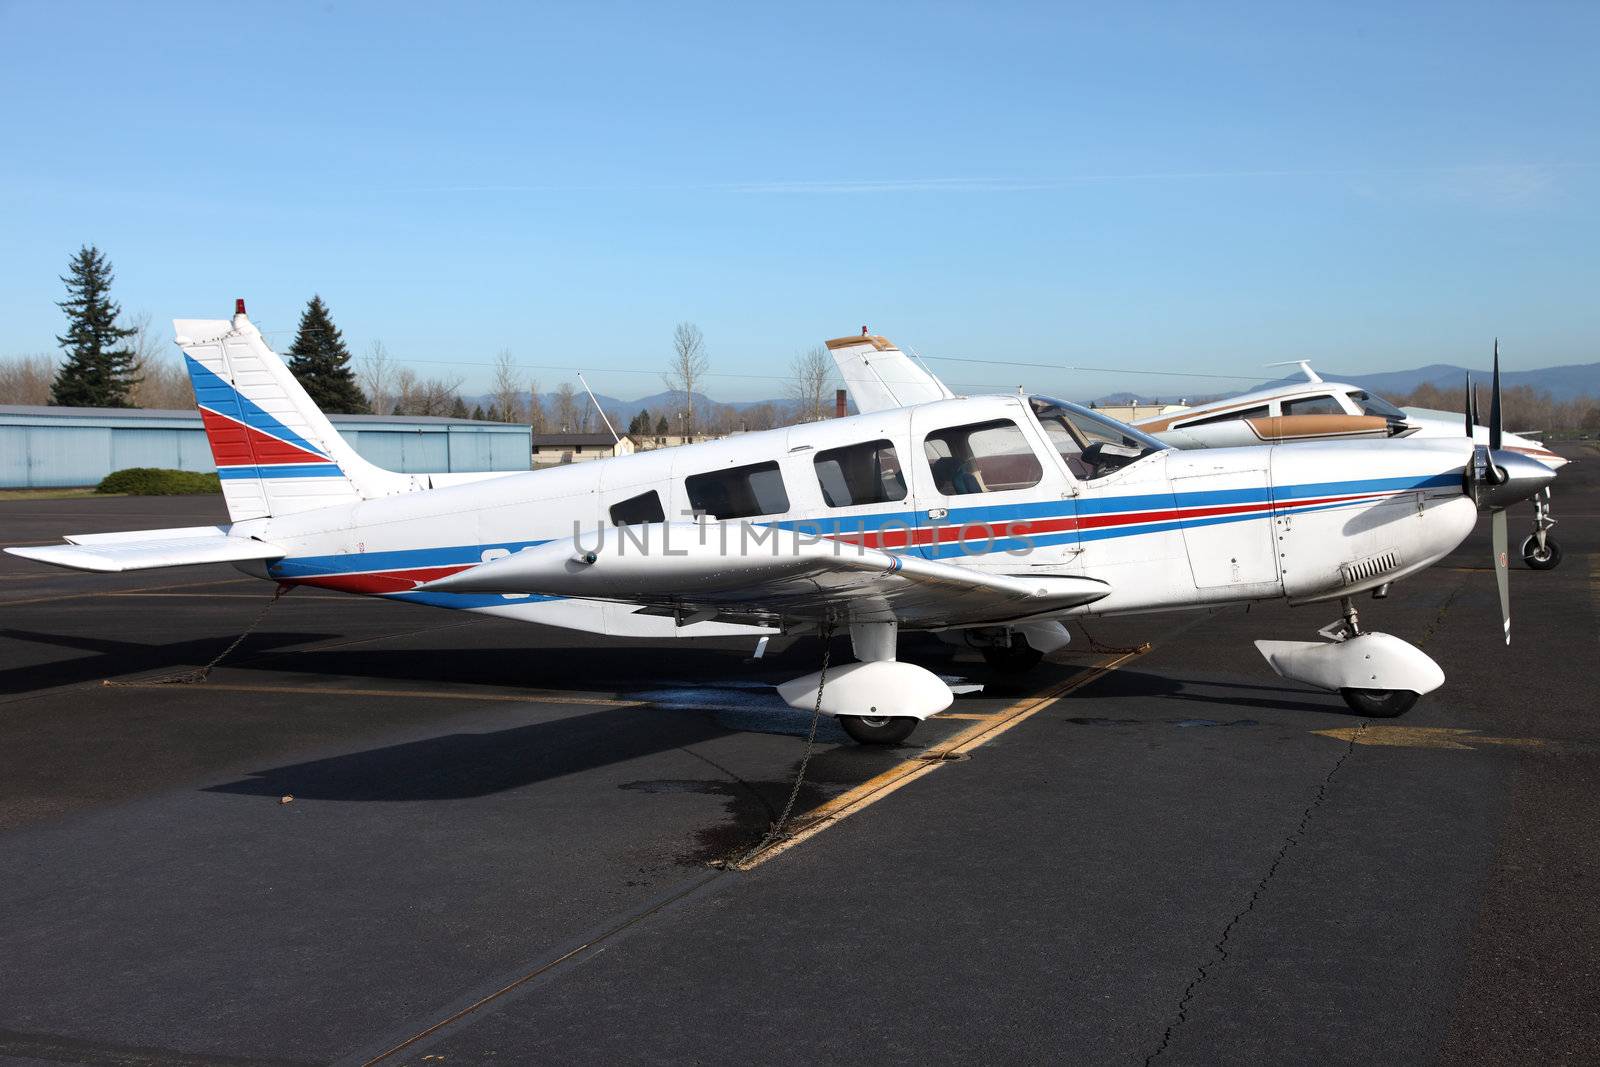 	
Single engine aircraft parked at the Troudale airport near Portland OR.